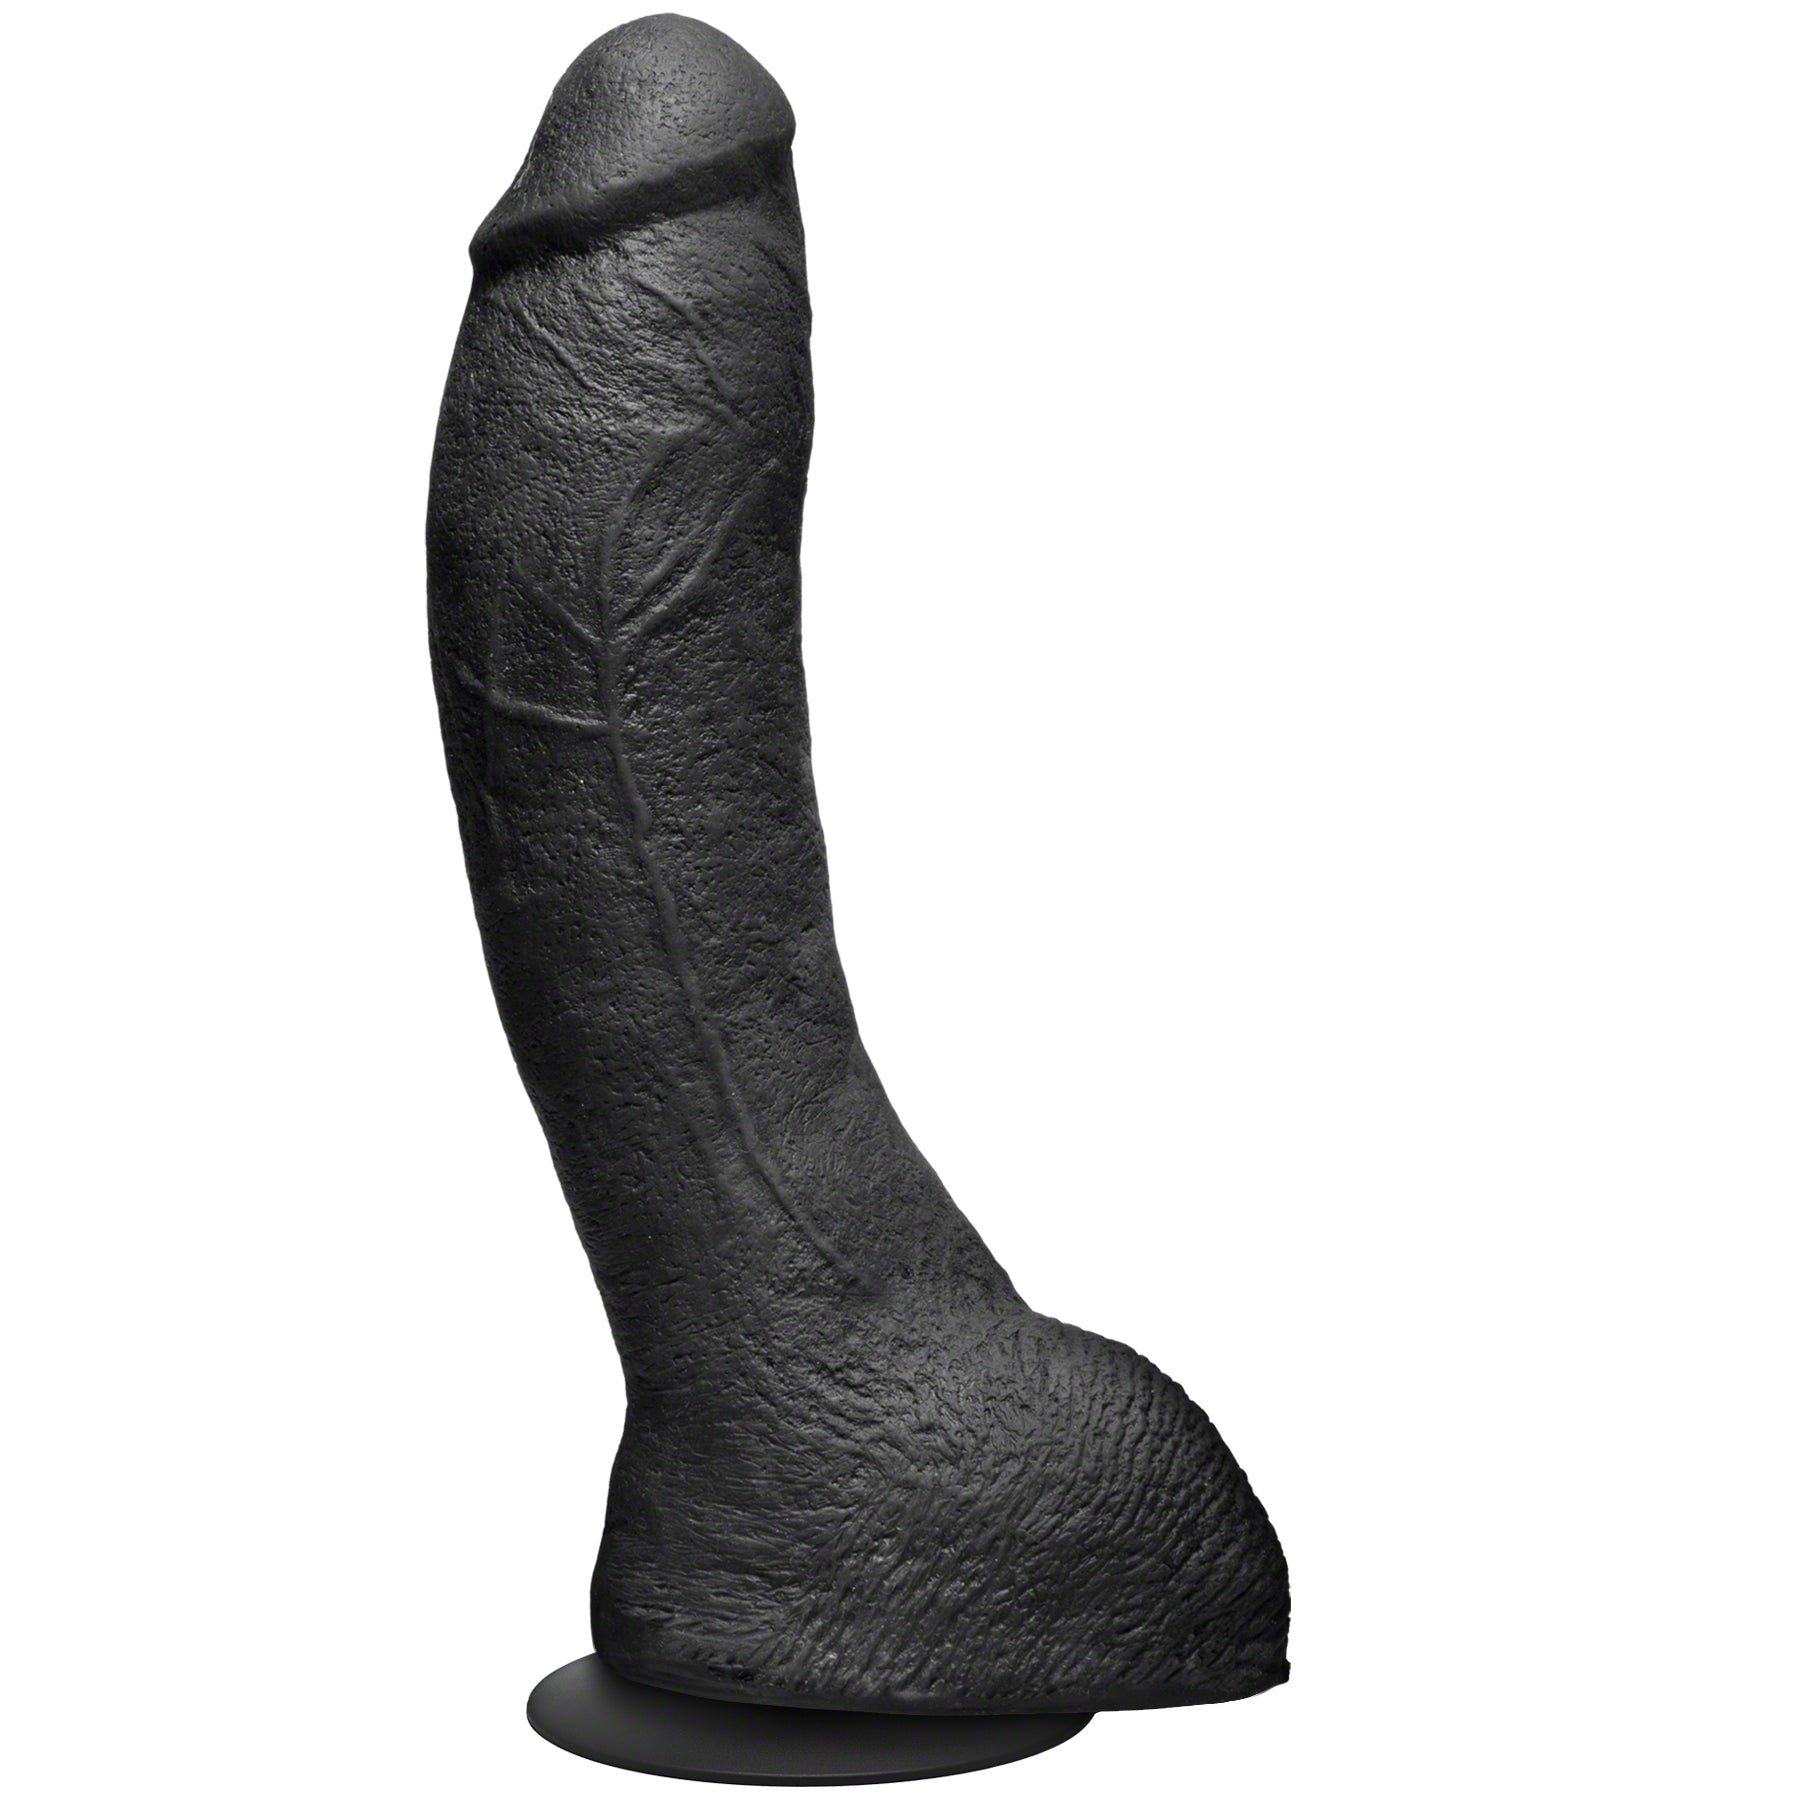 Merci - the Perfect P-Spot Cock - With Removable  Vac-U-Lock Suction Cup - Black-1